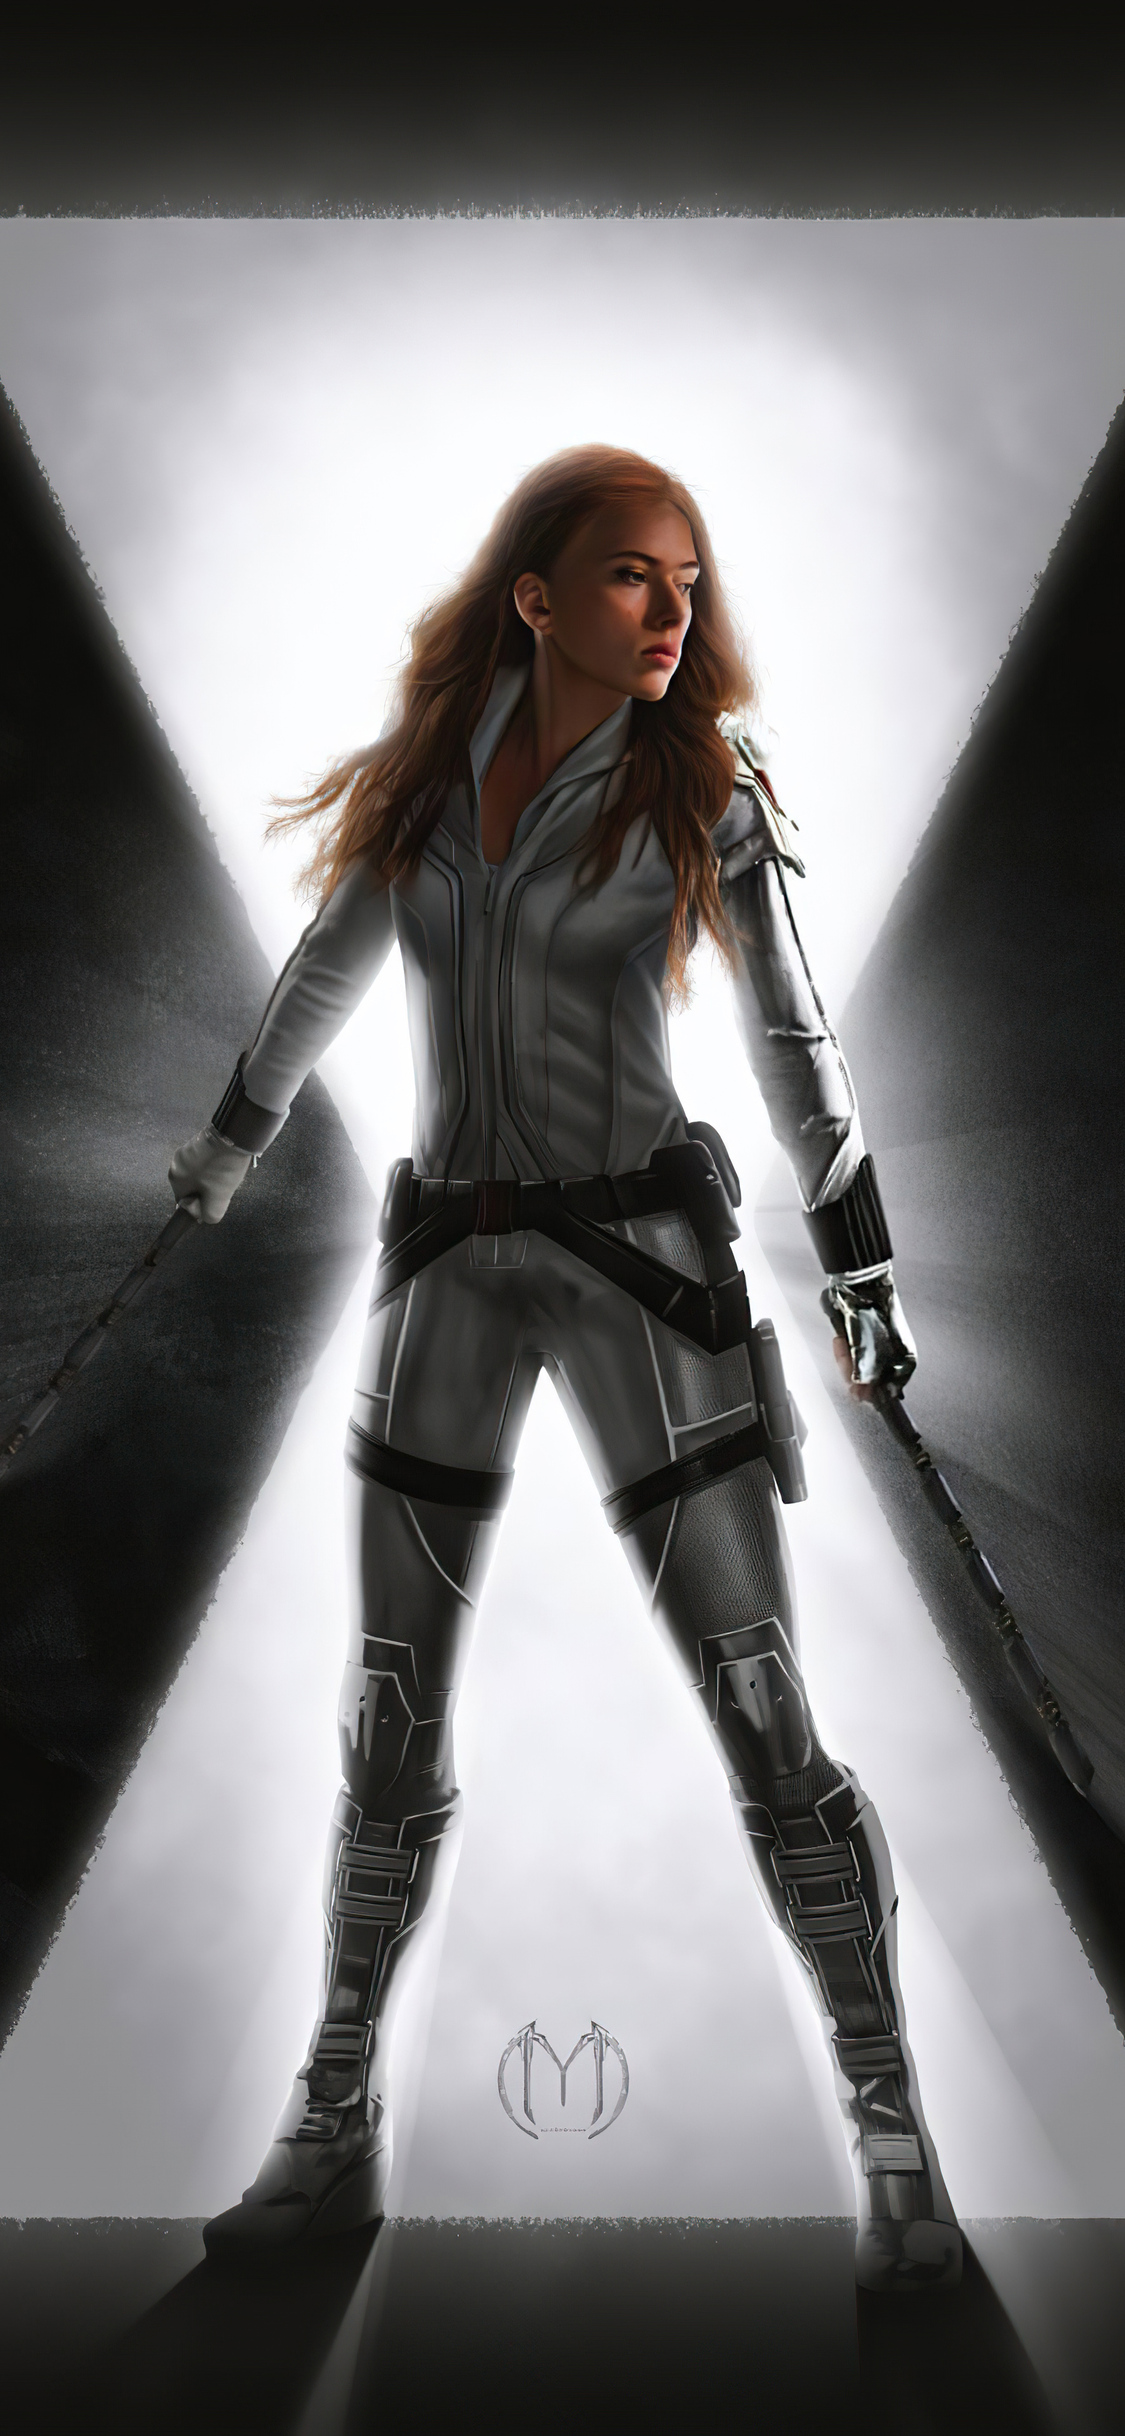 Movie Black Widow 2020 4k iPhone XS, iPhone iPhone X HD 4k Wallpaper, Image, Background, Photo and Picture